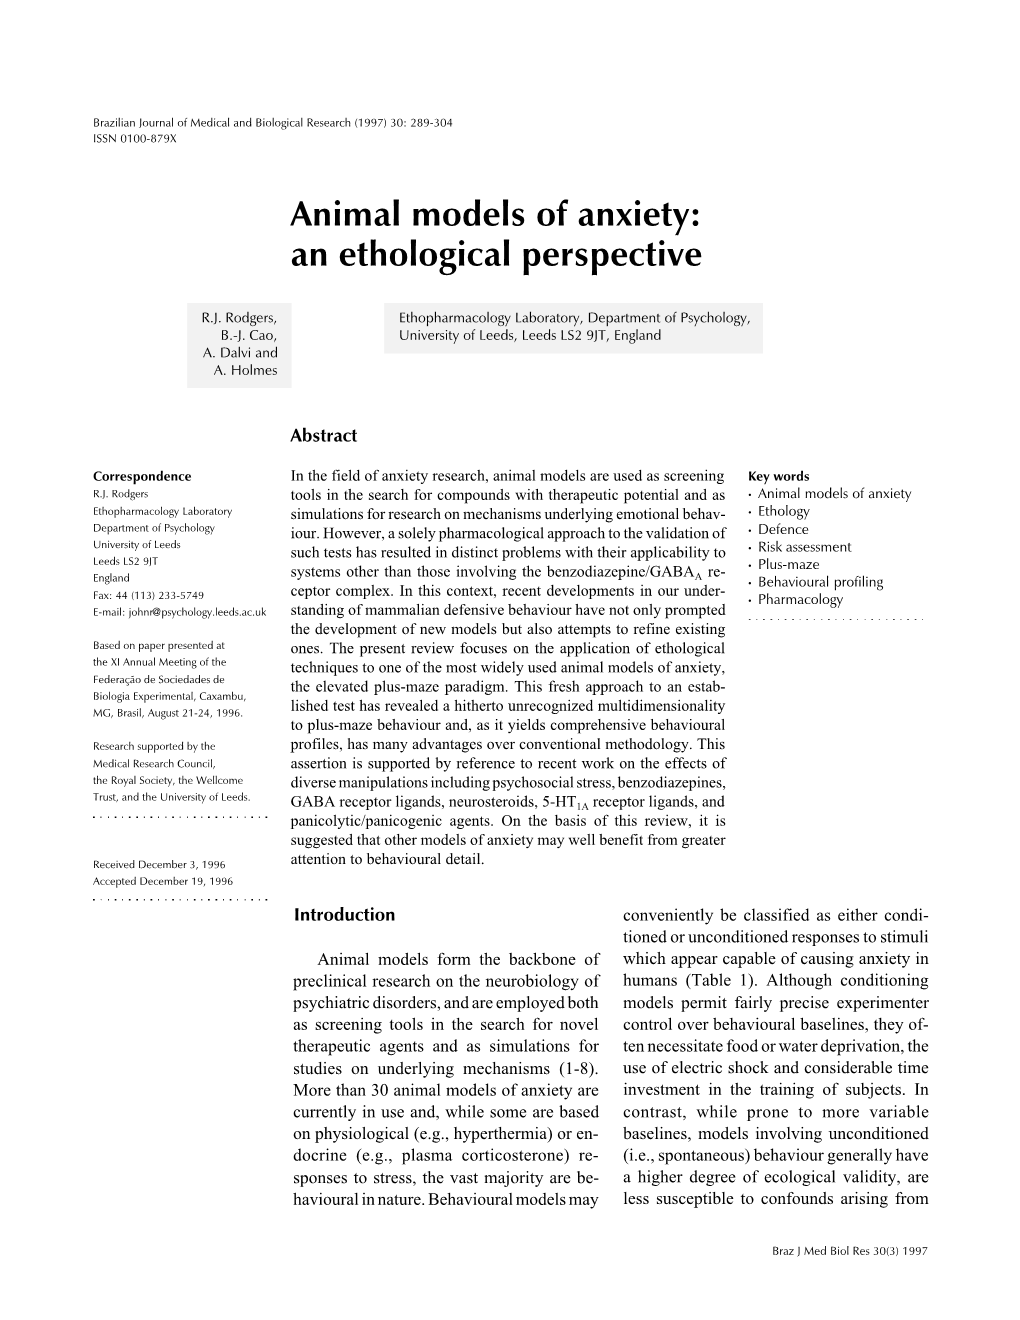 Animal Models of Anxiety: an Ethological Perspective